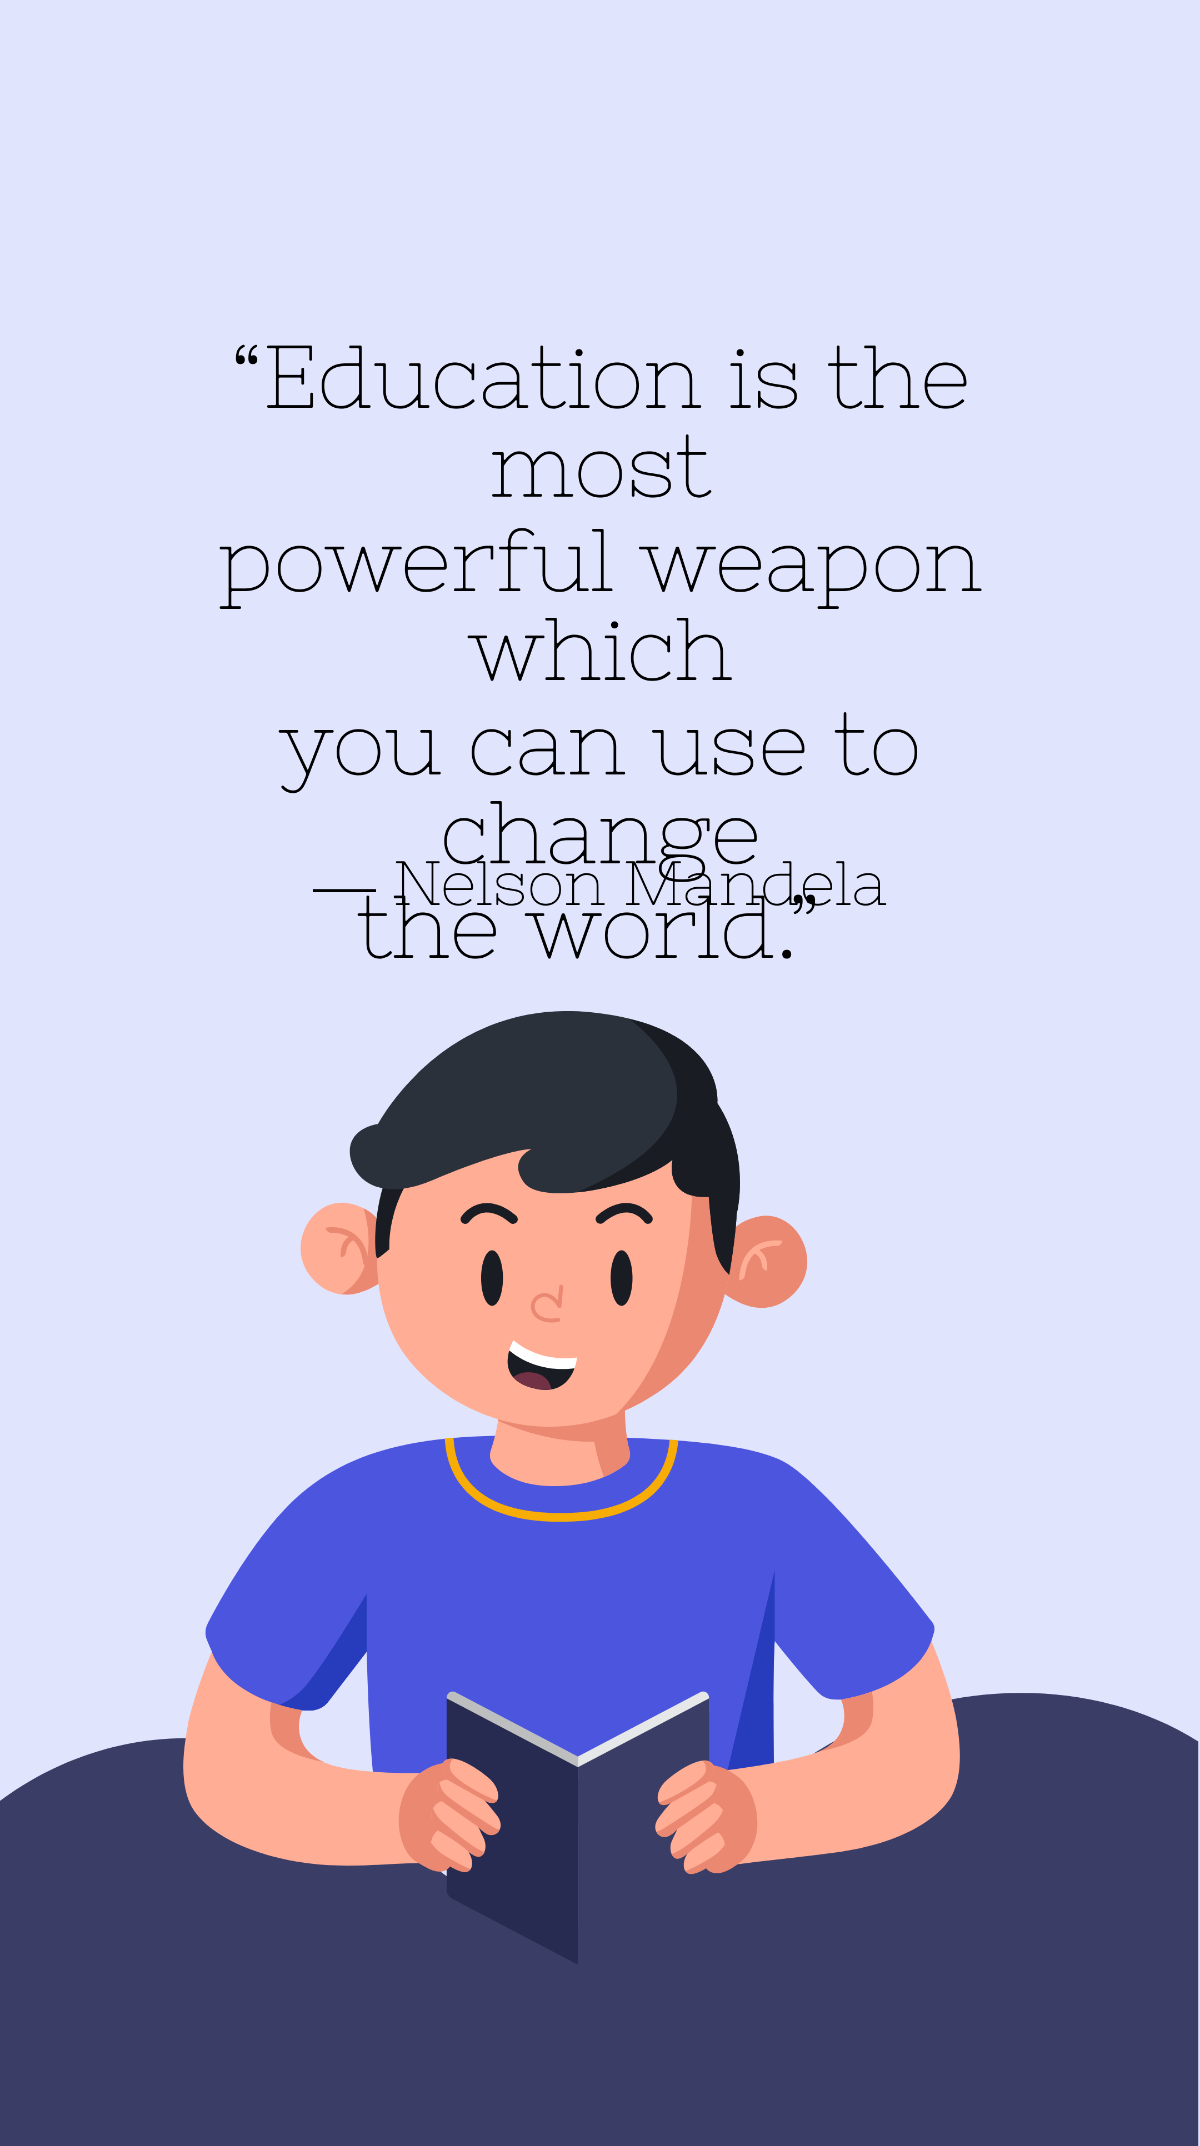 Nelson Mandela - Education is the most powerful weapon which you can use to change the world. Template